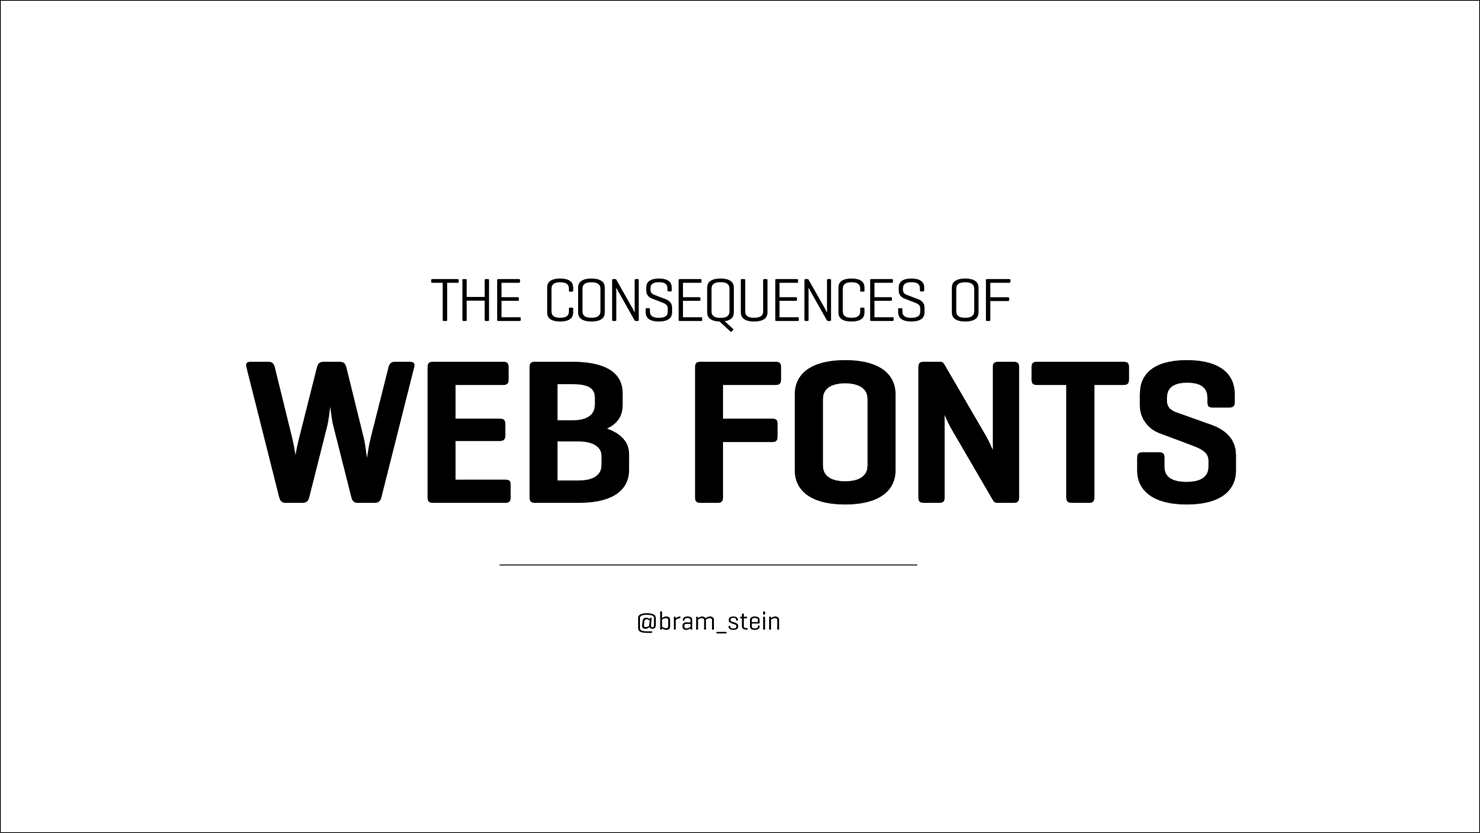 The Consequences of Web Fonts opening slide